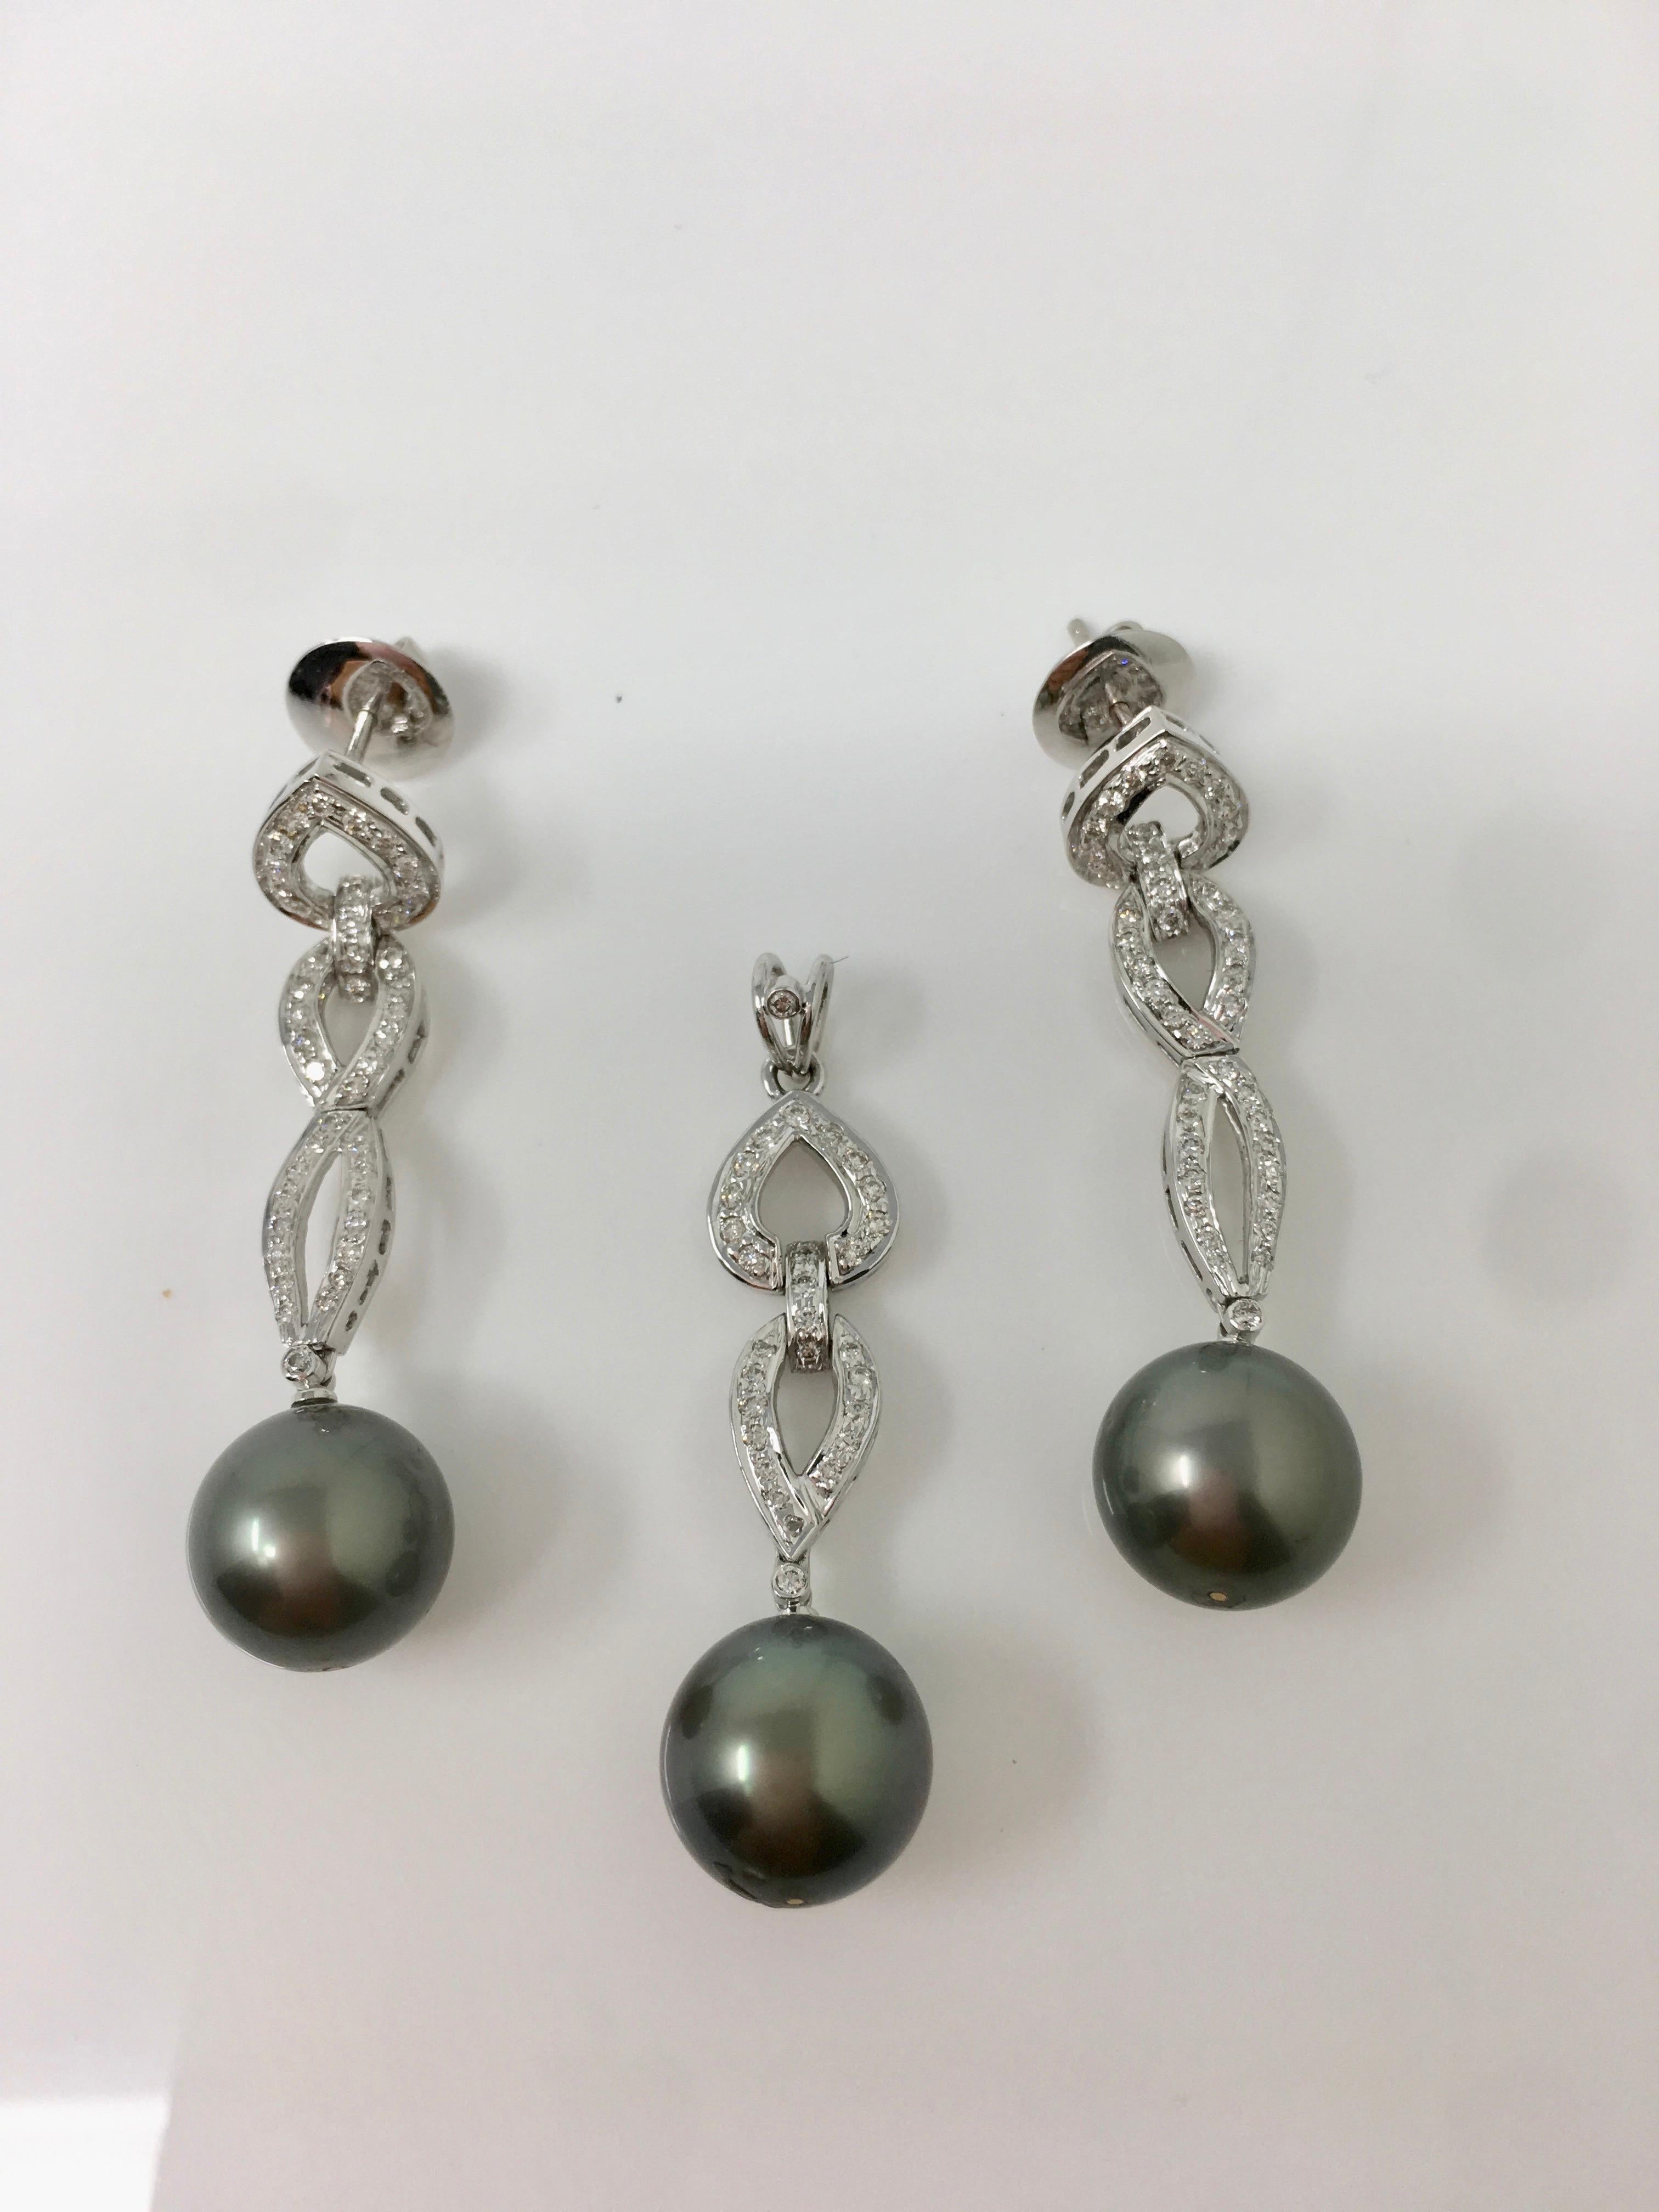 This fabulous white round brilliant diamond weighing 1.68 carat with VS clarity, GH color and gray south sea pearls ( three 11.6mm each ) three piece pendant set  includes a pendant and a pair of earrings. The length of the earrings and the pendant